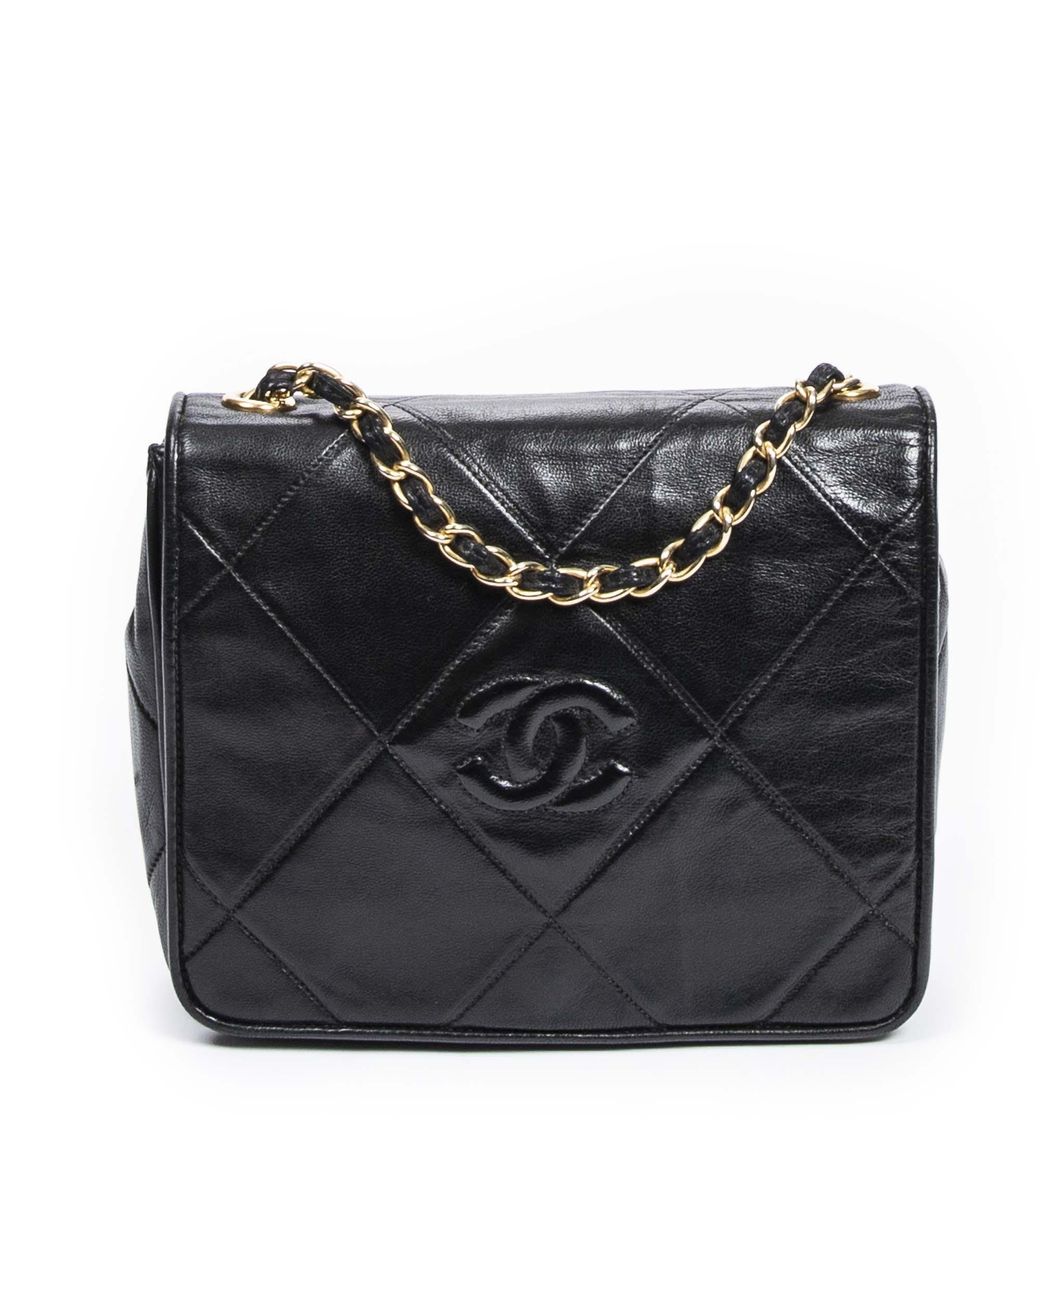 Chanel Vintage Cc Square Full Flap in Black